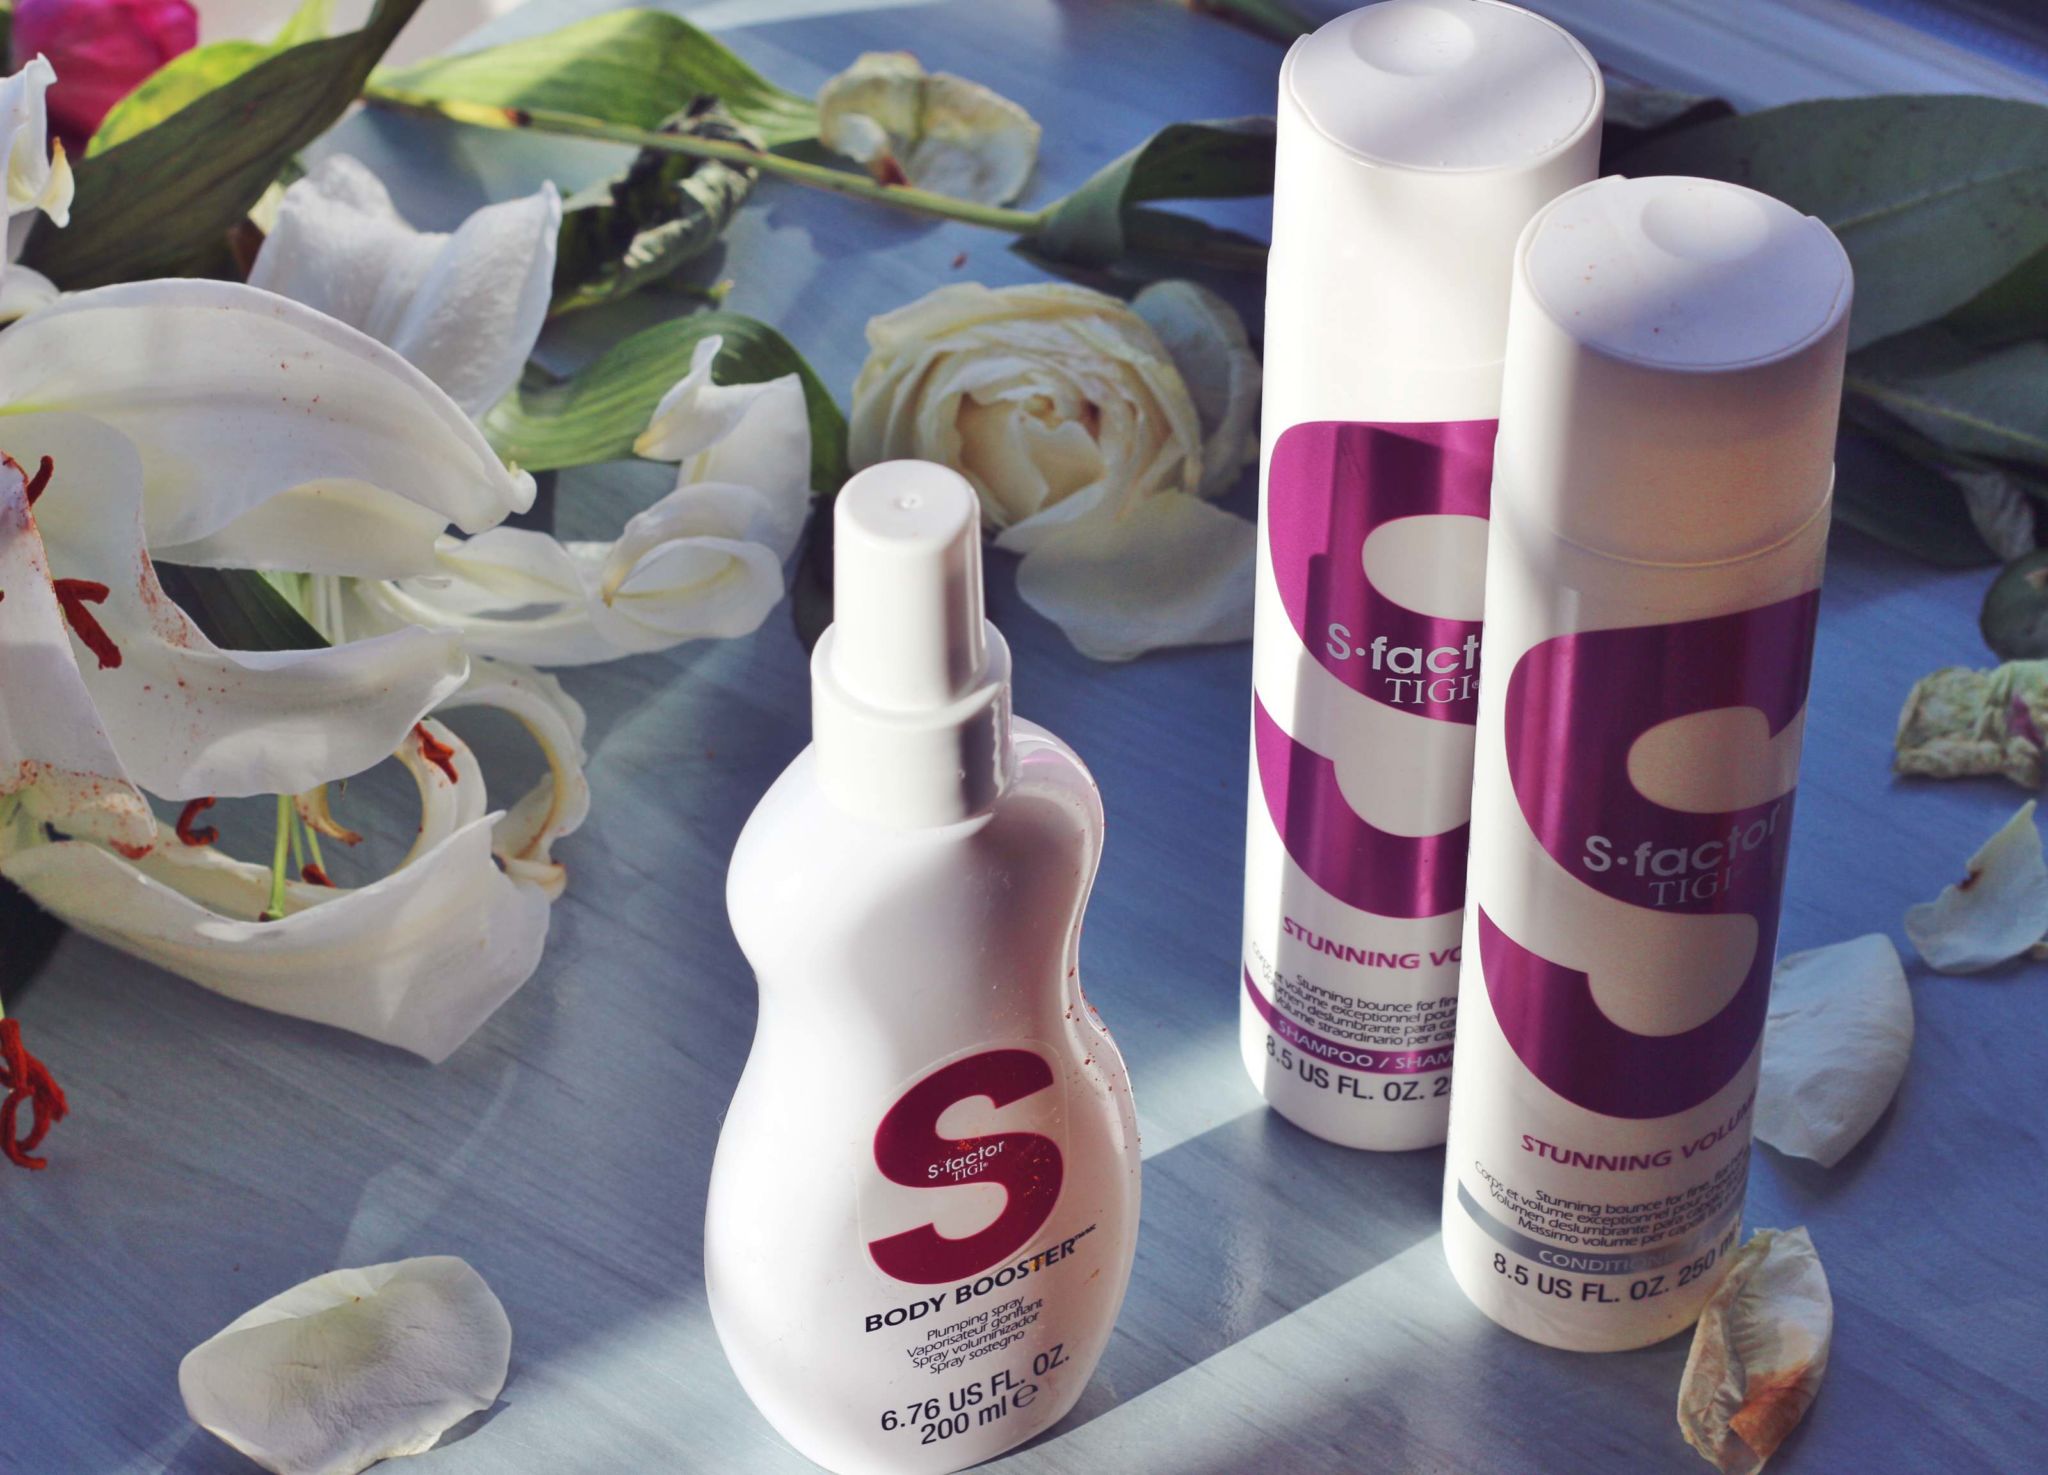 S Factor Haircare by Tigi Hair Product Review